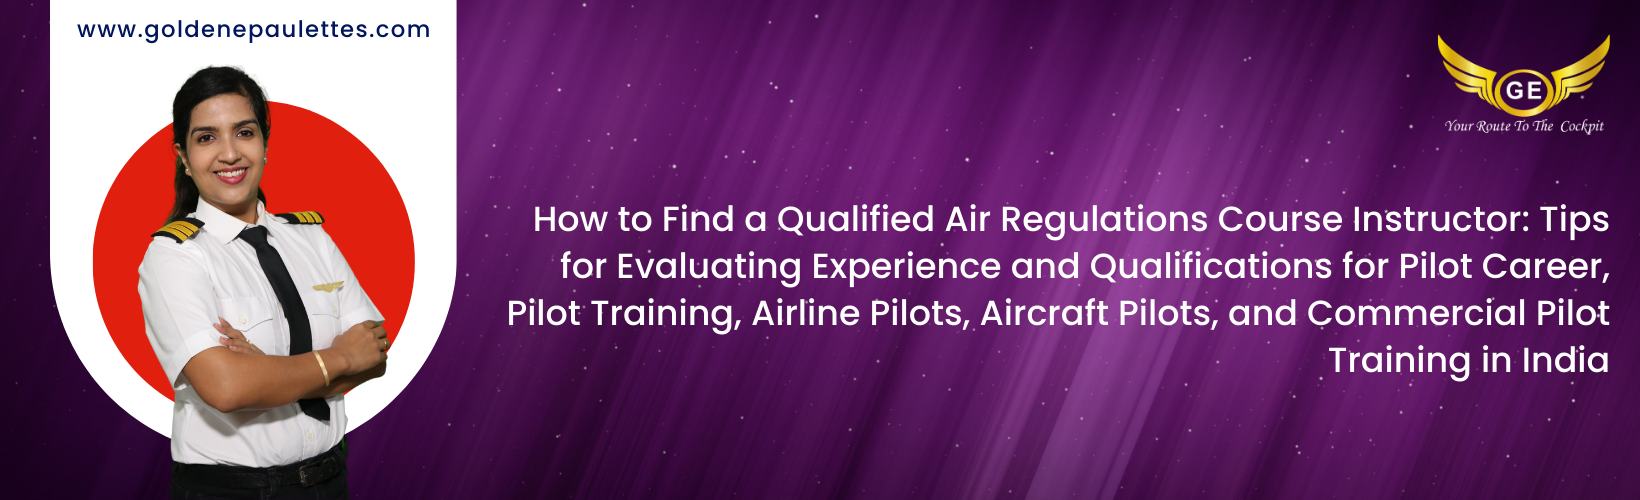 Overview of Popular Air Regulations Course Software